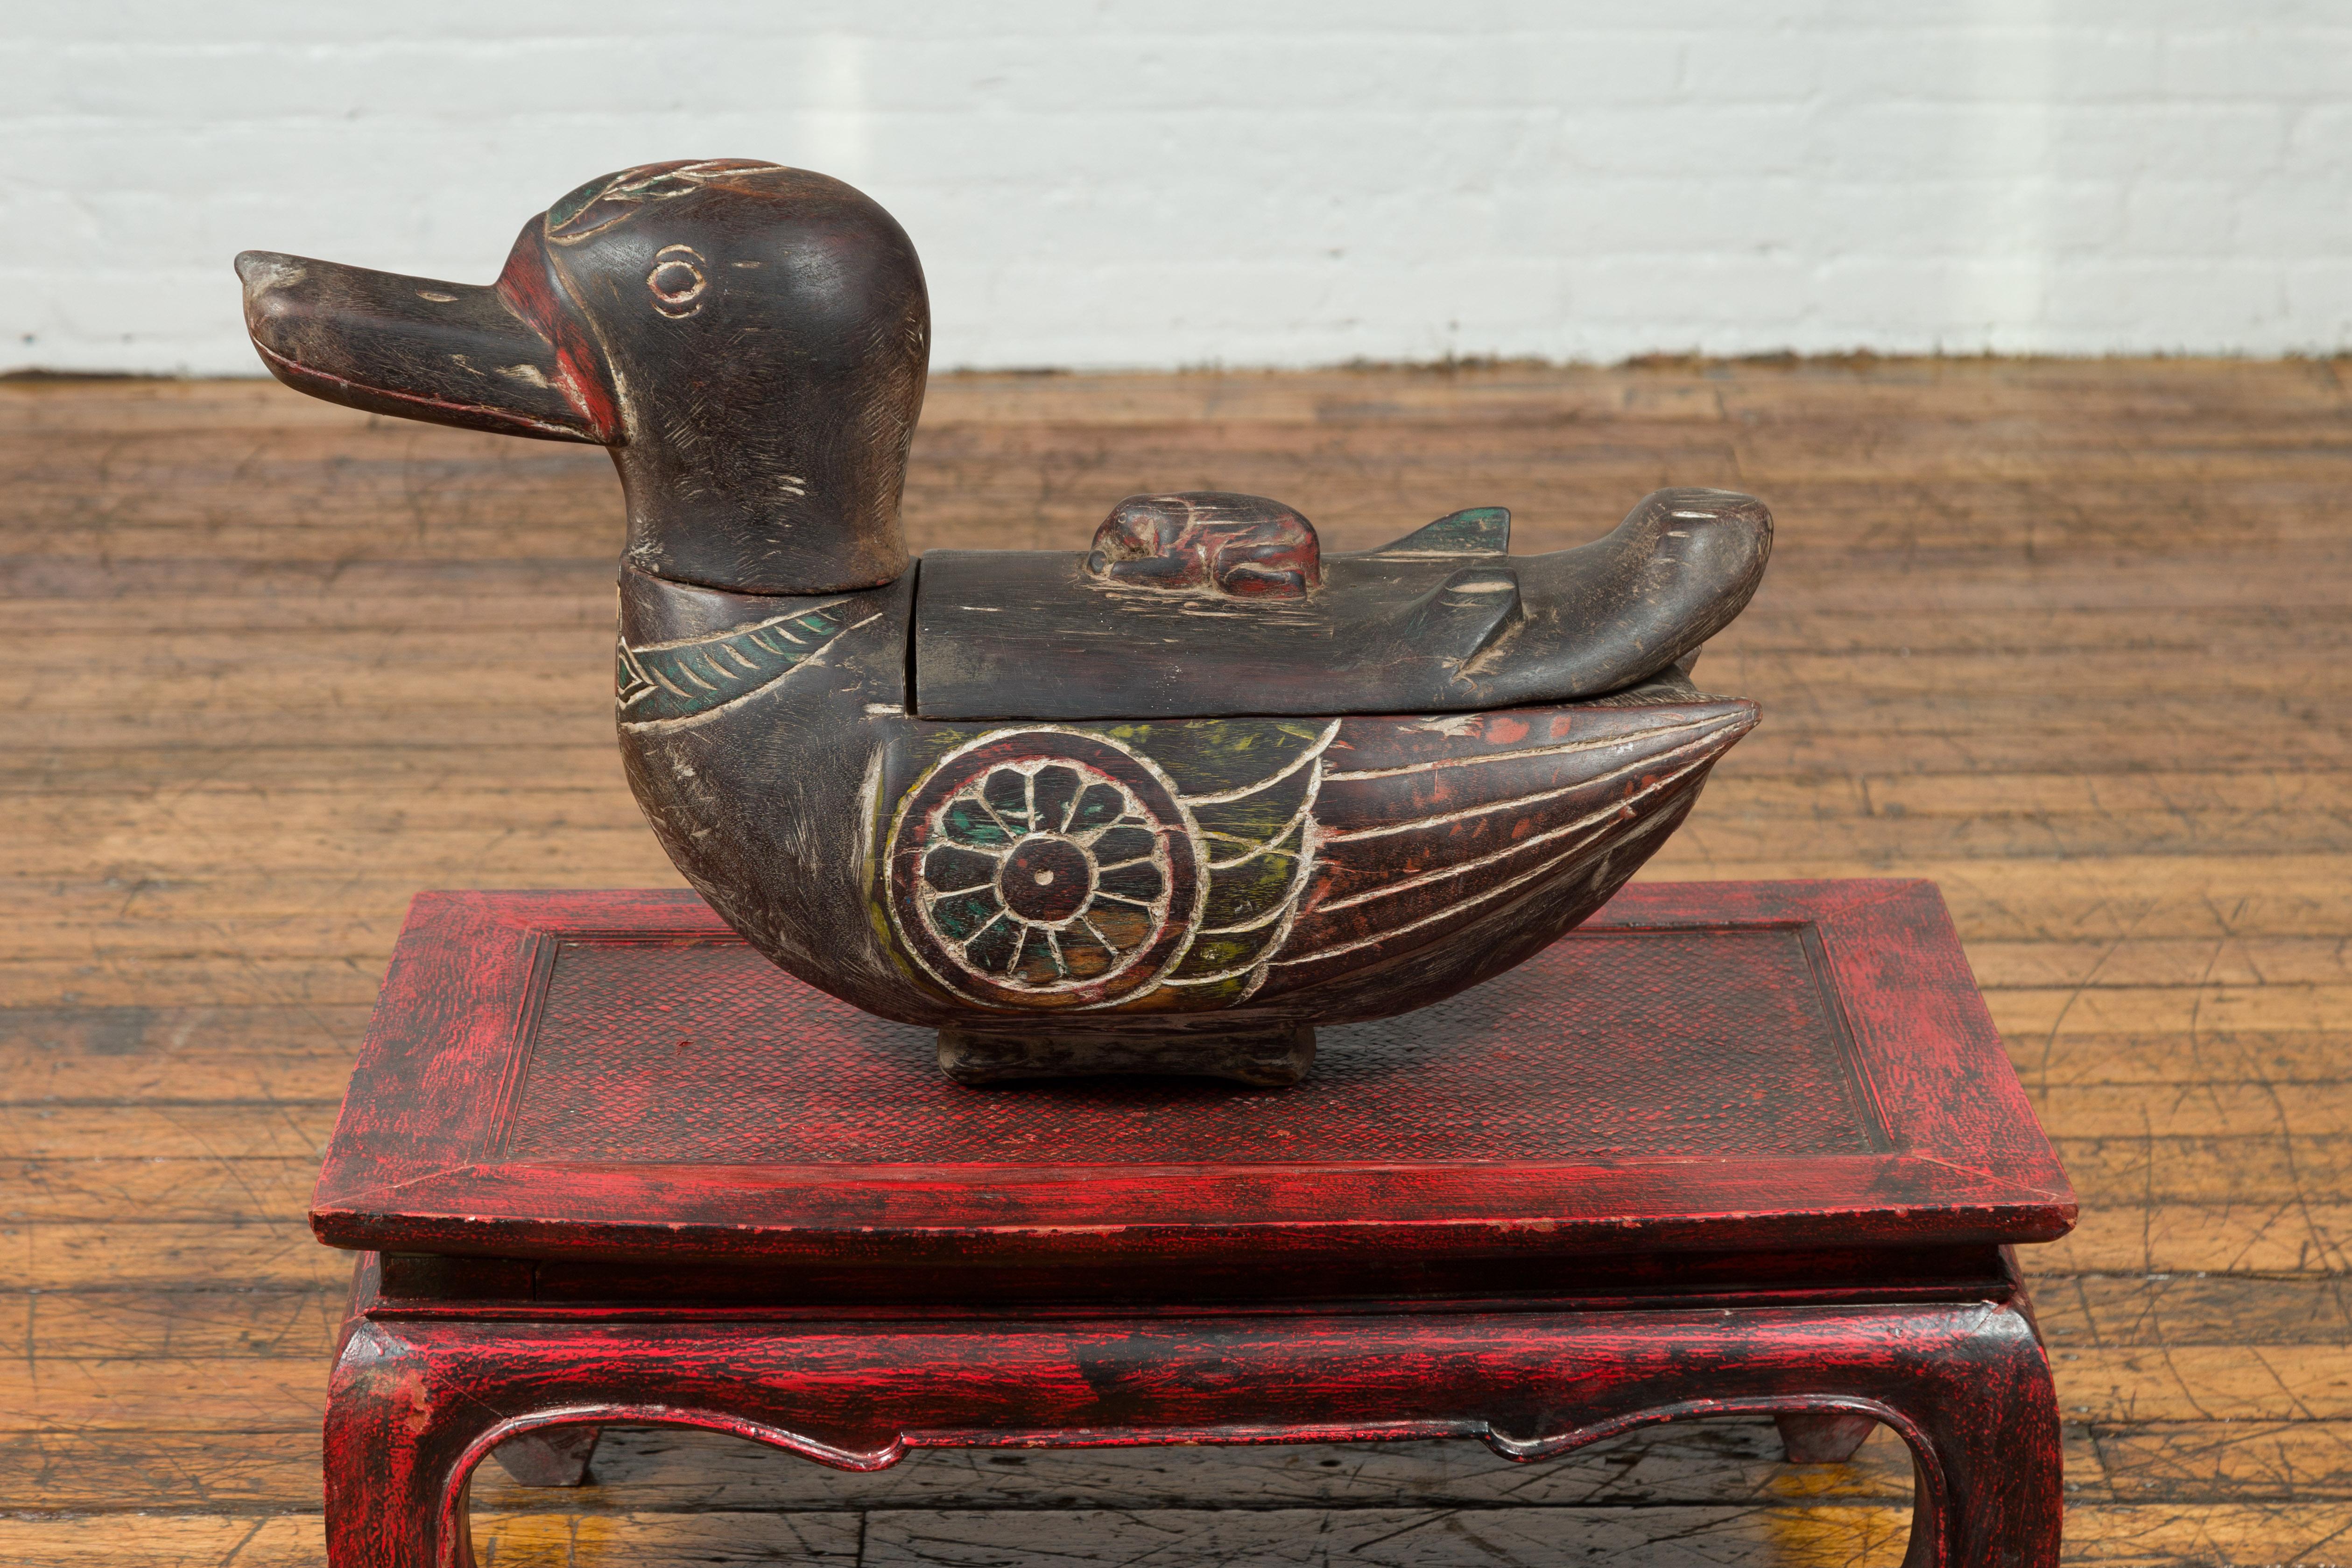 A contemporary Thai handmade duck prayer box with polychrome accents, found in Chiang Mai. Created in Northern Thailand, this hand carved wooden prayer box depicts a small duck with removable top, accented with red and green highlights. Incised on